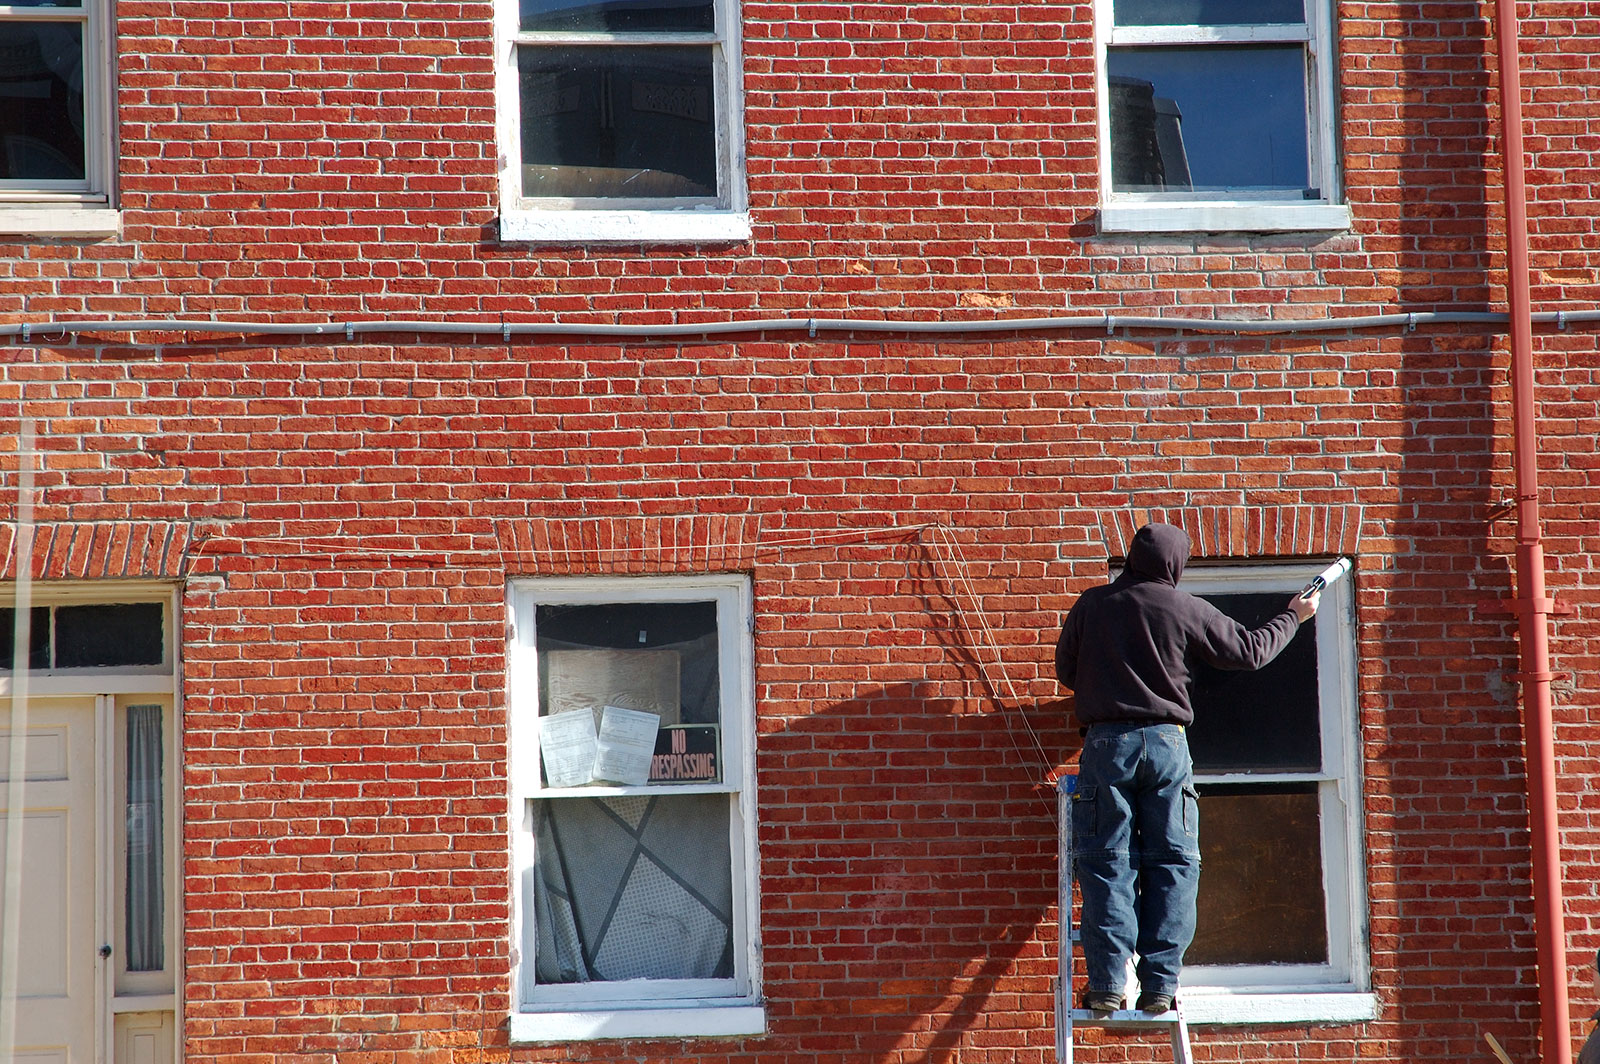 Man painting a window frame